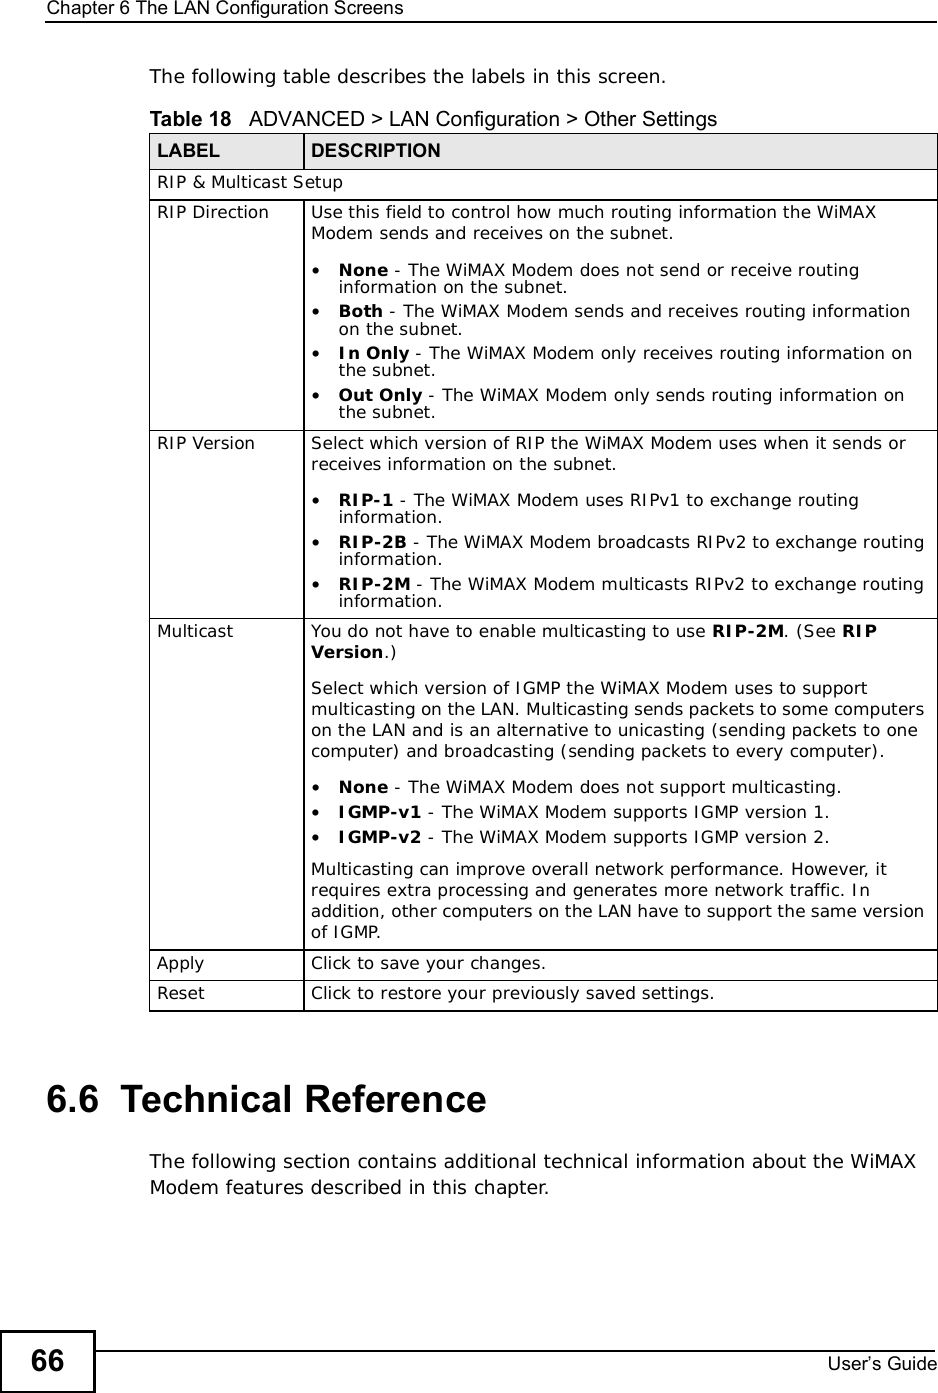 Chapter 6The LAN Configuration ScreensUser s Guide66The following table describes the labels in this screen.6.6  Technical ReferenceThe following section contains additional technical information about the WiMAX Modem features described in this chapter.Table 18   ADVANCED &gt; LAN Configuration &gt; Other SettingsLABEL DESCRIPTIONRIP &amp; Multicast SetupRIP Direction Use this field to control how much routing information the WiMAX Modem sends and receives on the subnet.•None - The WiMAX Modem does not send or receive routing information on the subnet.•Both - The WiMAX Modem sends and receives routing information on the subnet.•In Only - The WiMAX Modem only receives routing information on the subnet.•Out Only - The WiMAX Modem only sends routing information on the subnet.RIP Version Select which version of RIP the WiMAX Modem uses when it sends or receives information on the subnet.•RIP-1 - The WiMAX Modem uses RIPv1 to exchange routing information.•RIP-2B - The WiMAX Modem broadcasts RIPv2 to exchange routing information.•RIP-2M - The WiMAX Modem multicasts RIPv2 to exchange routing information.Multicast You do not have to enable multicasting to use RIP-2M. (See RIPVersion.)Select which version of IGMP the WiMAX Modem uses to support multicasting on the LAN. Multicasting sends packets to some computers on the LAN and is an alternative to unicasting (sending packets to one computer) and broadcasting (sending packets to every computer).•None - The WiMAX Modem does not support multicasting.•IGMP-v1 - The WiMAX Modem supports IGMP version 1.•IGMP-v2 - The WiMAX Modem supports IGMP version 2.Multicasting can improve overall network performance. However, it requires extra processing and generates more network traffic. In addition, other computers on the LAN have to support the same version of IGMP.Apply Click to save your changes.Reset Click to restore your previously saved settings.